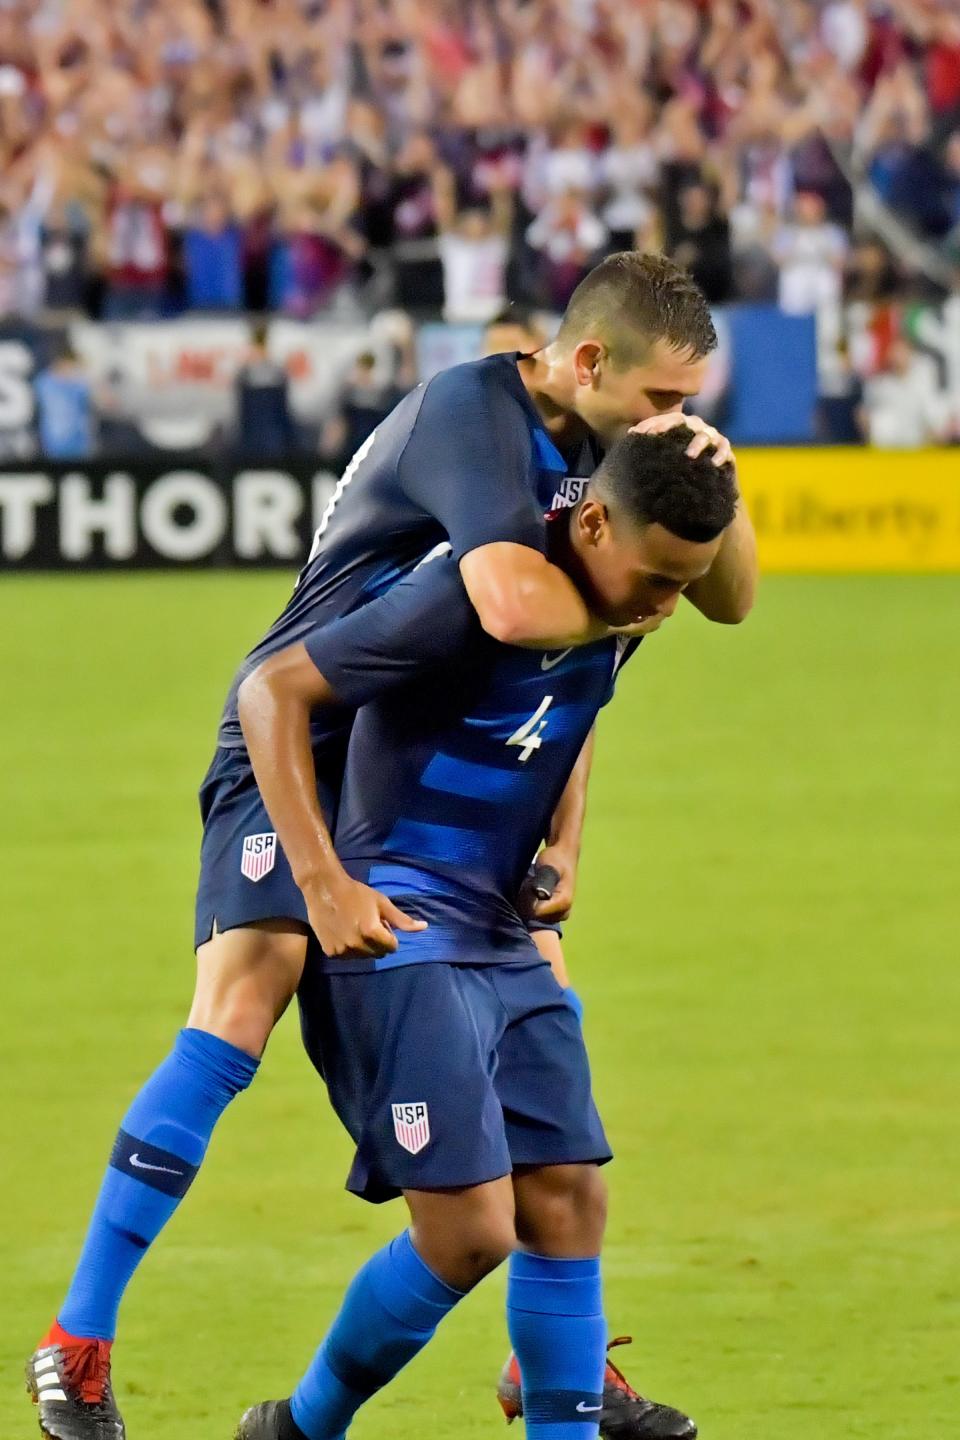 United States midfielder Wil Trapp, left, celebrates with midfielder Tyler Adams after defeating Mexico during an international friendly soccer match at Nissan Stadium in Nashville in September 2018.